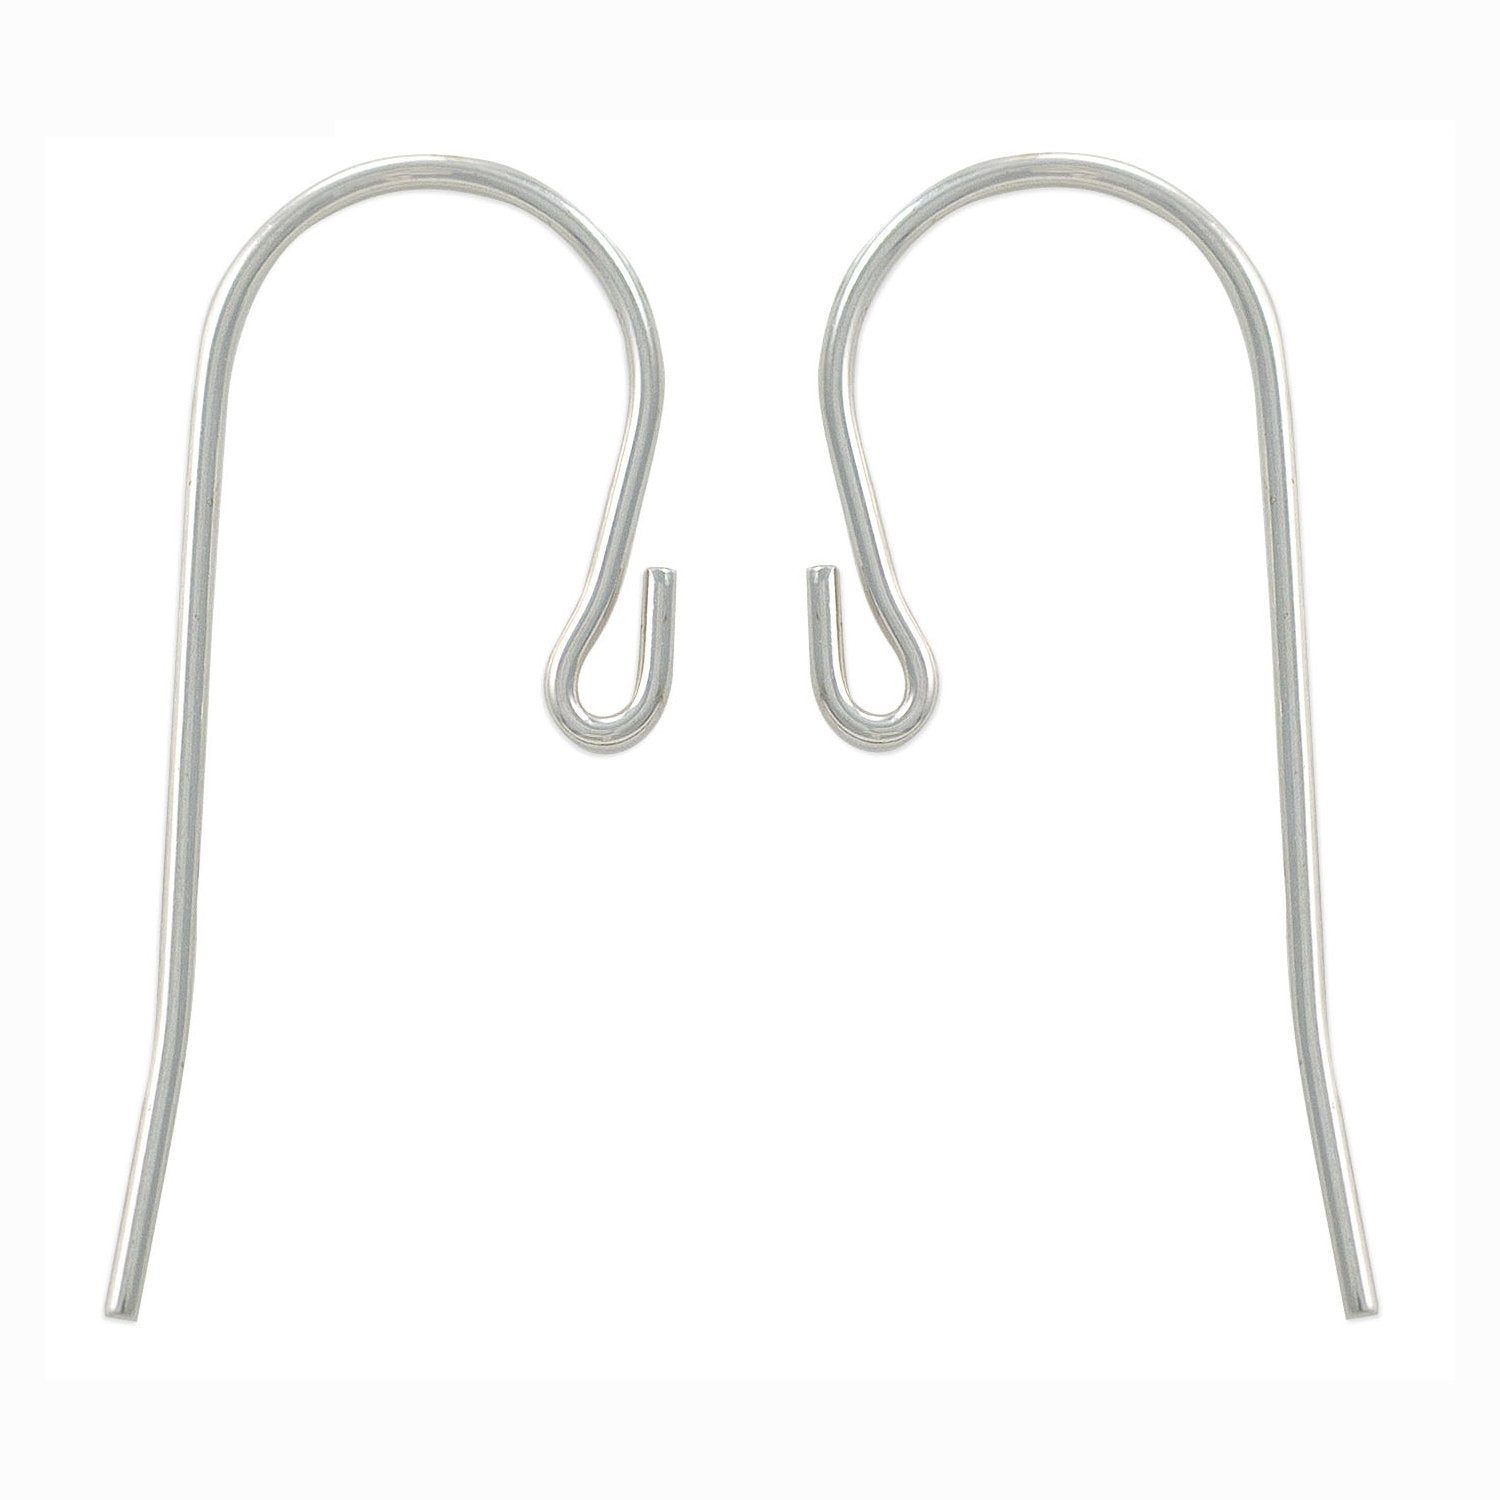 JewelrySupply Sterling Silver Earring Wires (1 Pair of Sterling Silver  Earrings)